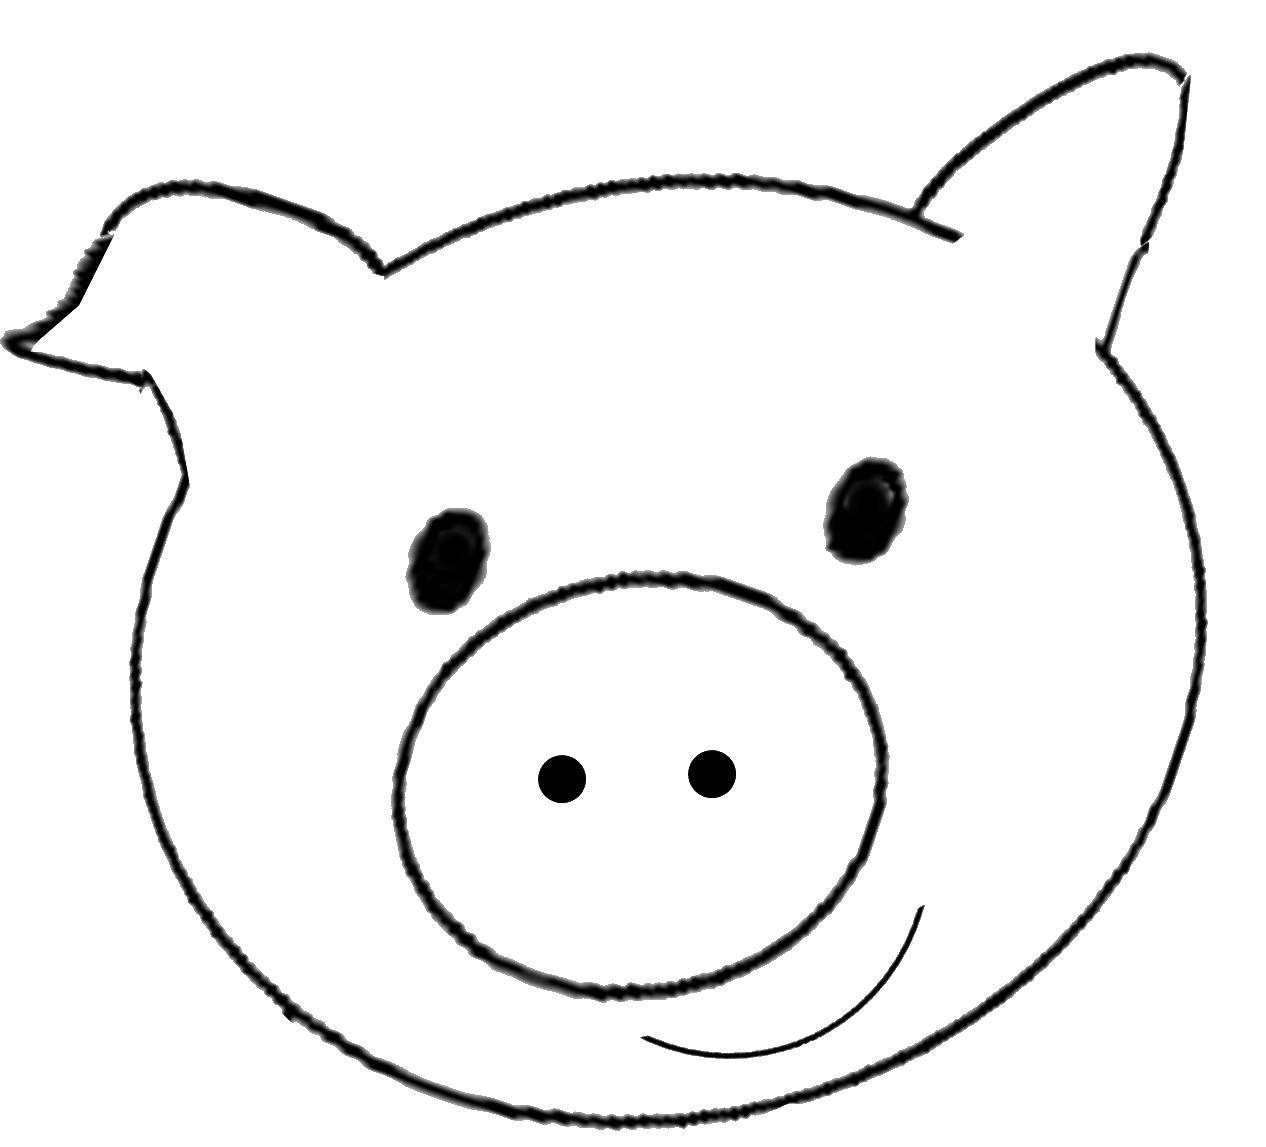 Coloring Piggy. Category The outline of a pig to cut. Tags:  Outline .